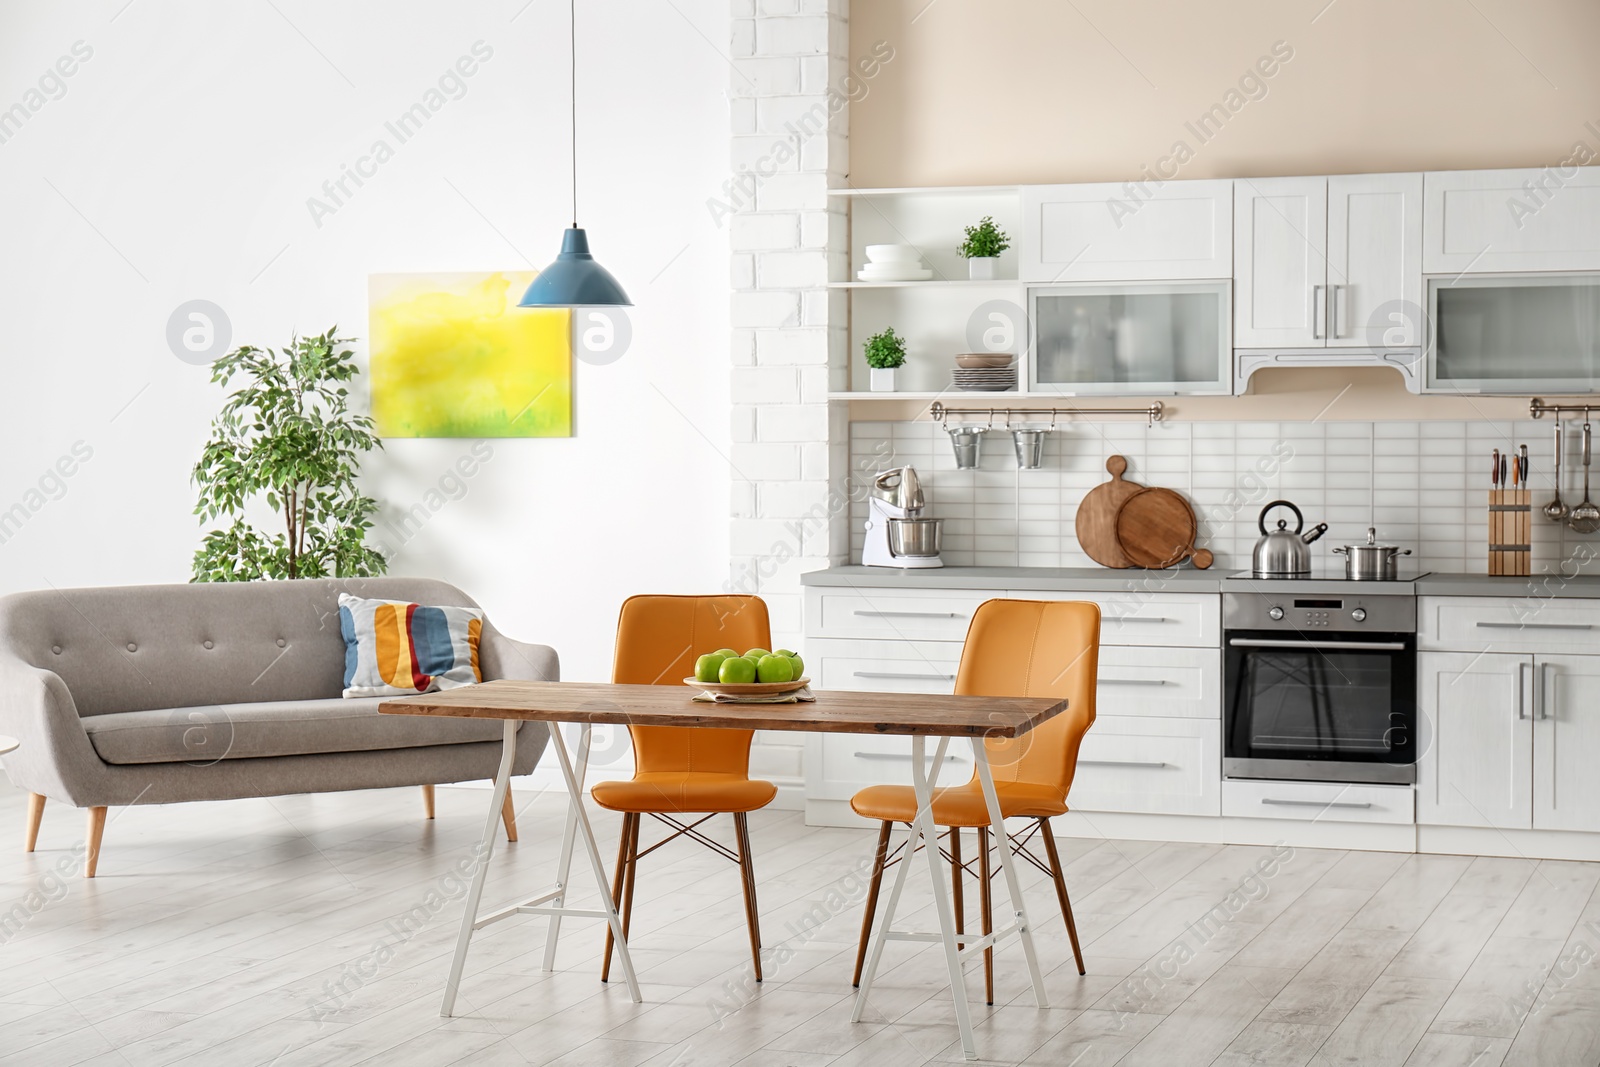 Photo of Stylish apartment interior with kitchen furniture and sofa